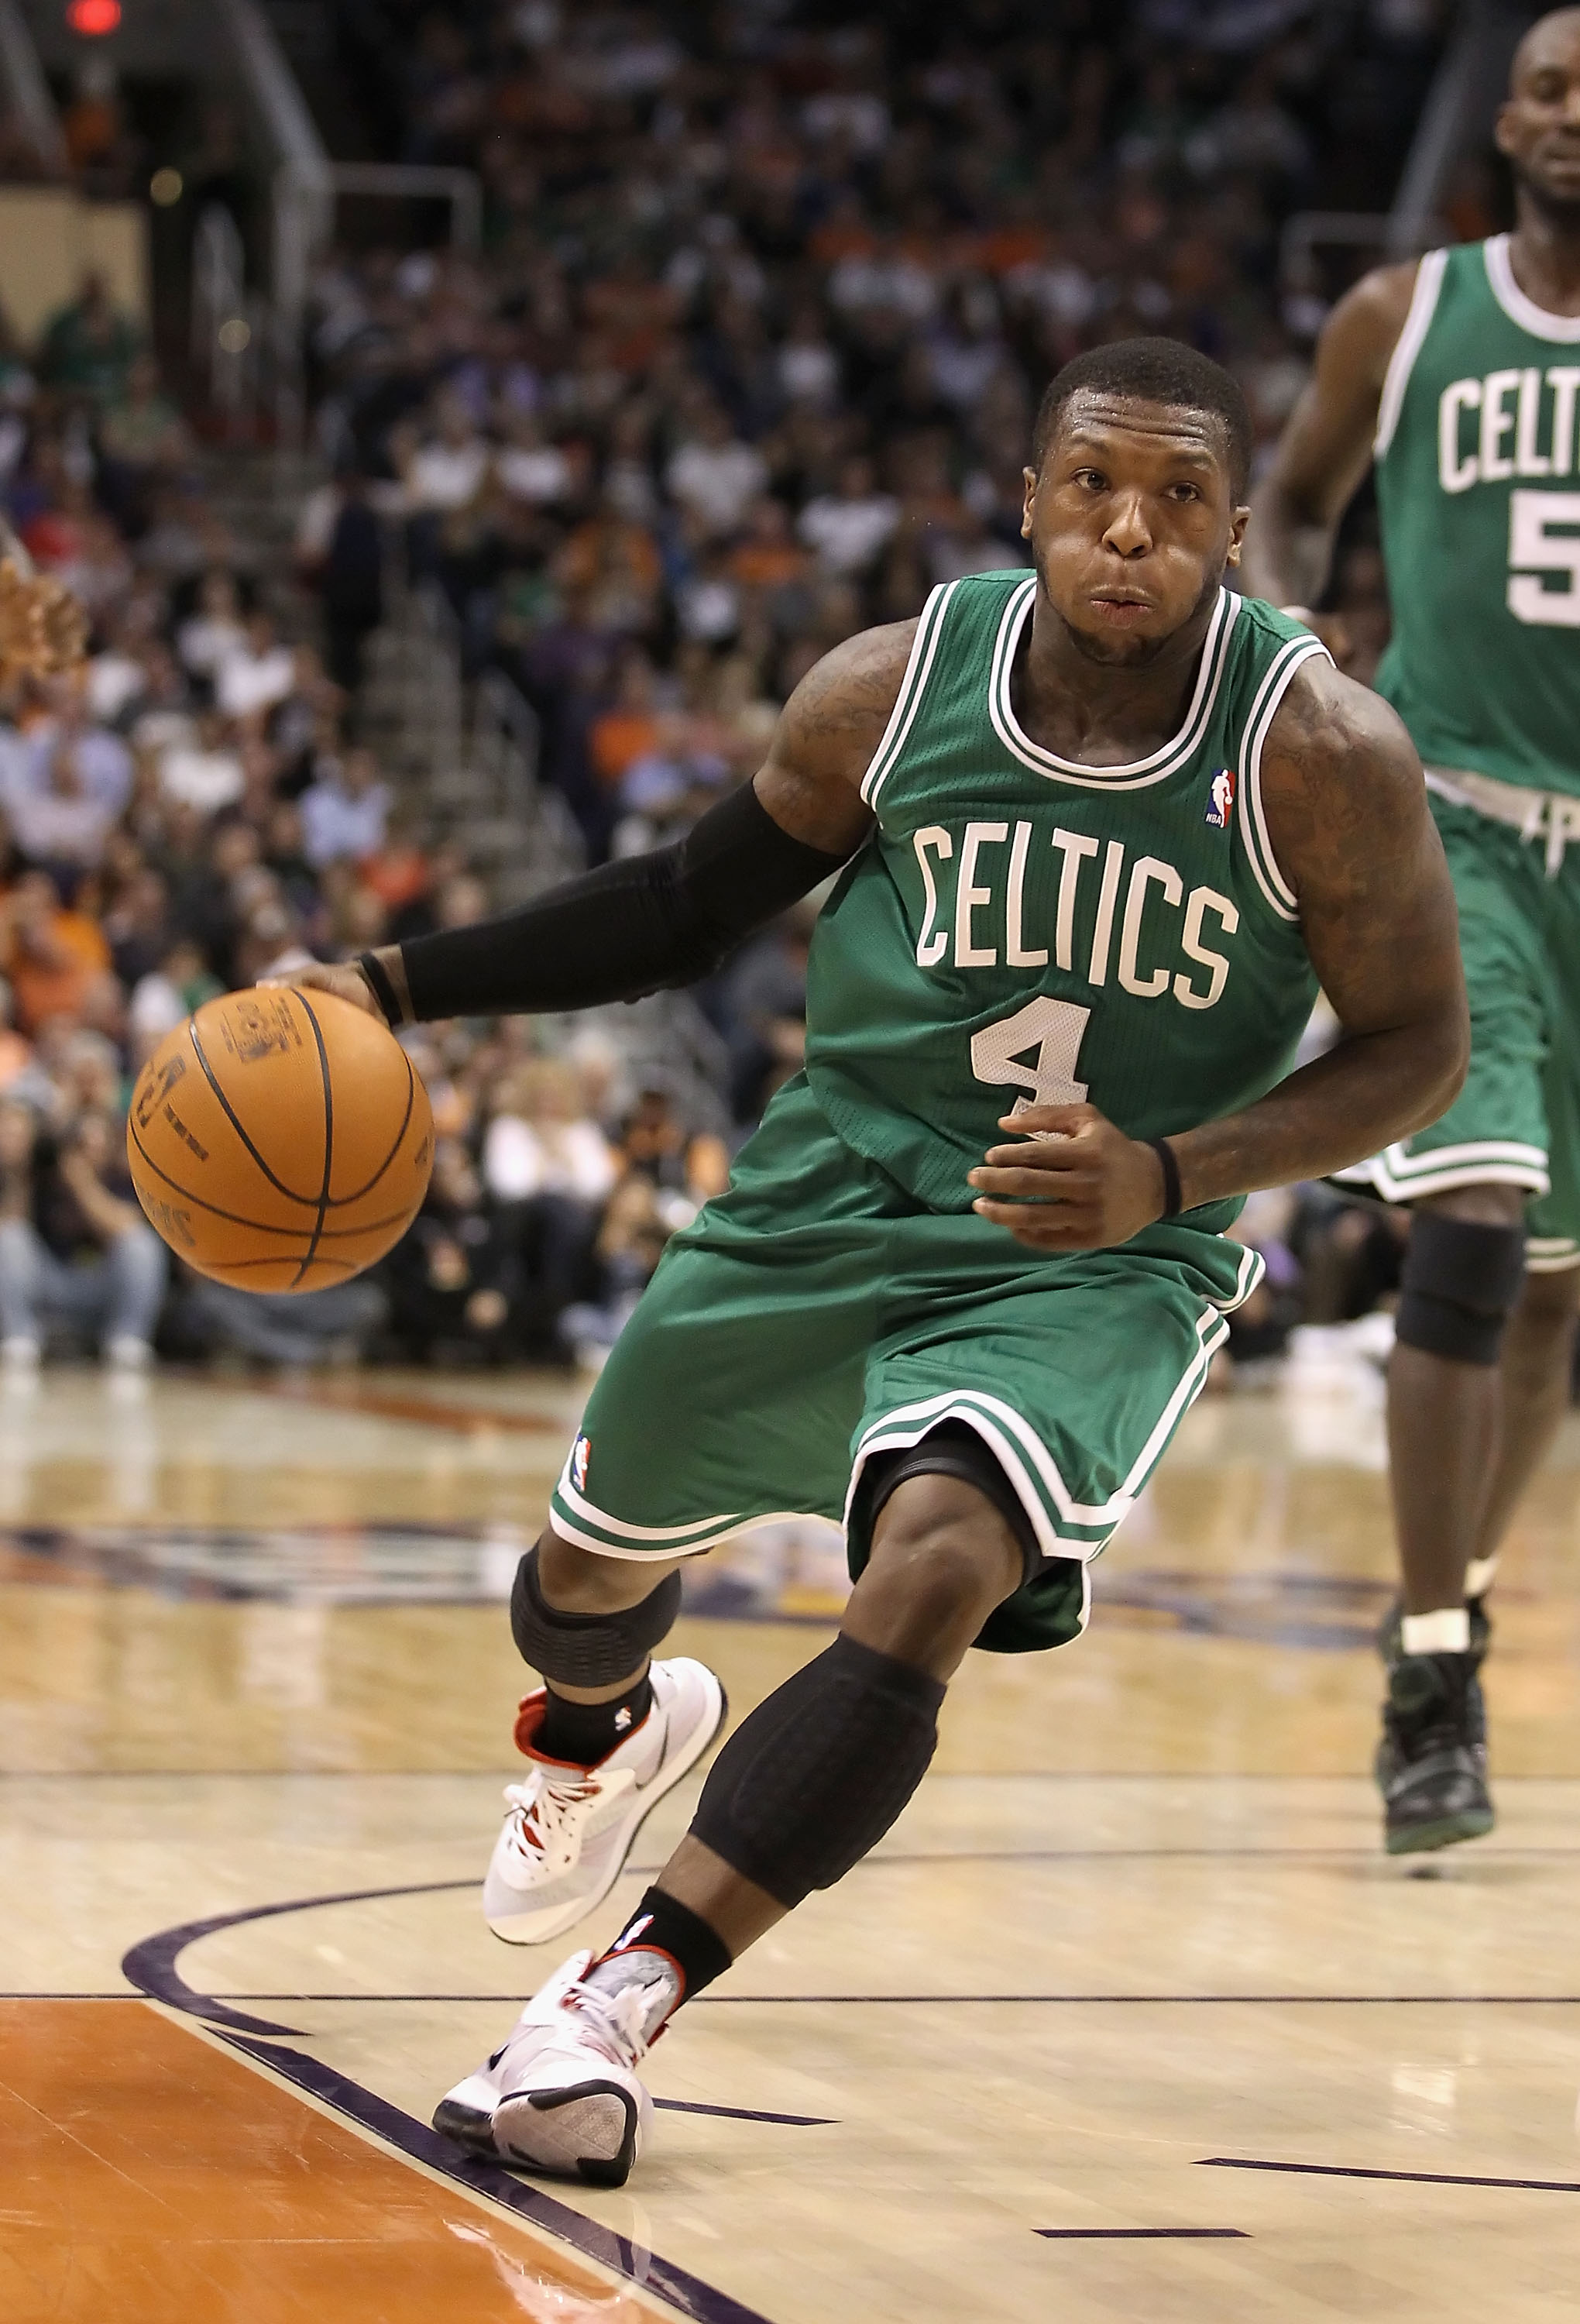 PHOENIX, AZ - JANUARY 28:  Nate Robinson #4 of the Boston Celtics handles the ball during the NBA game against the Phoenix Suns at US Airways Center on January 28, 2011 in Phoenix, Arizona. The Suns defeated the Celtics 88-71. NOTE TO USER: User expressly